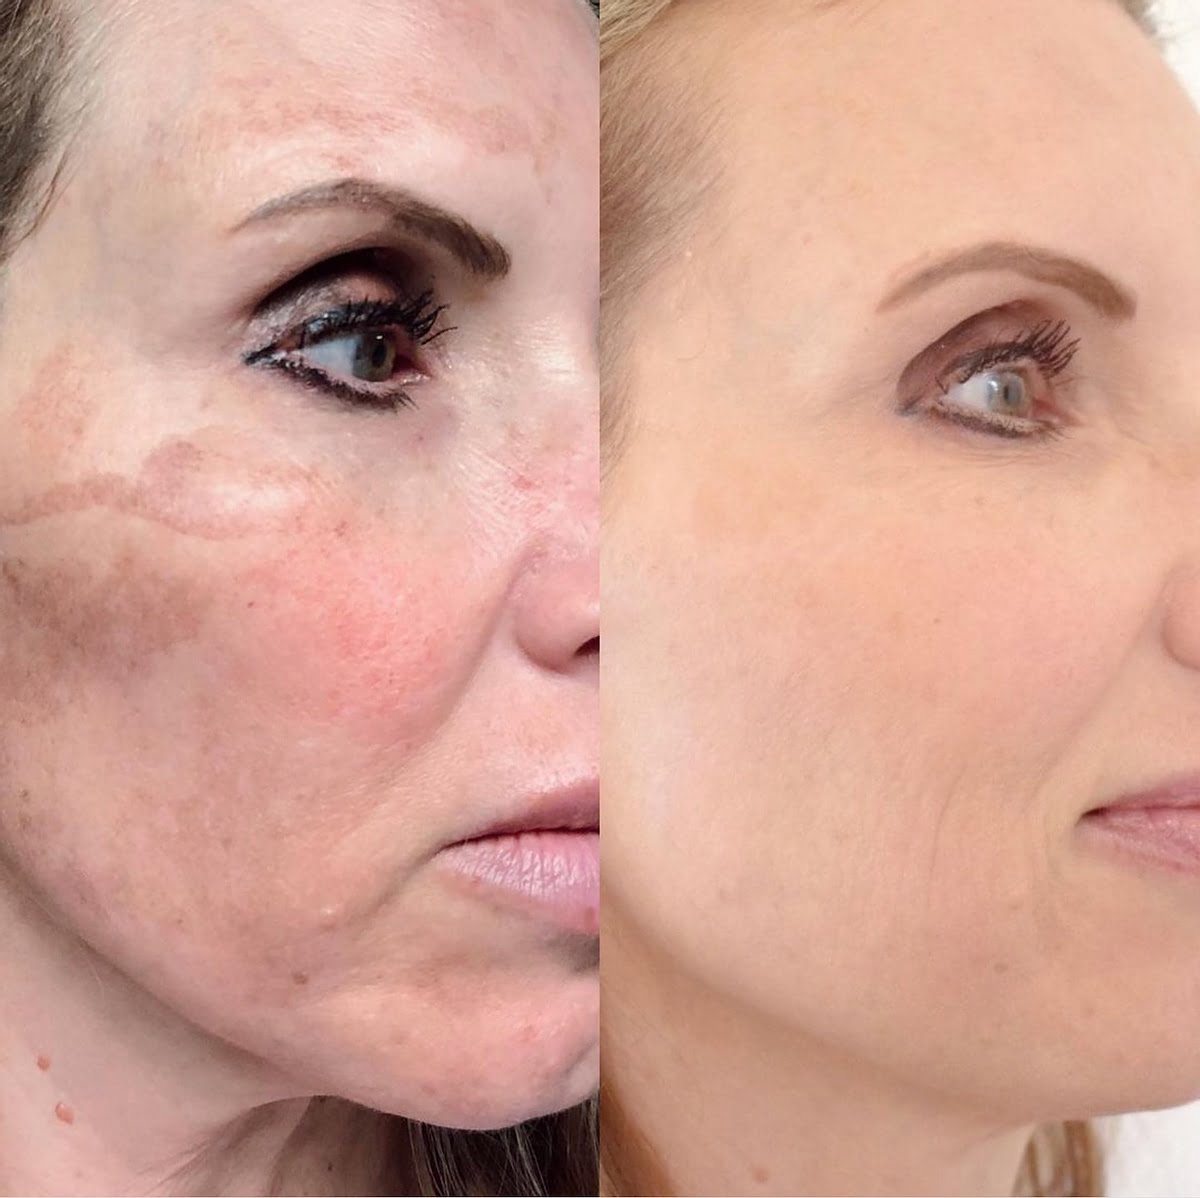 Chemical Peel Before & After Treatment Photos | Cosmedics MedSpa in Lehi, UT